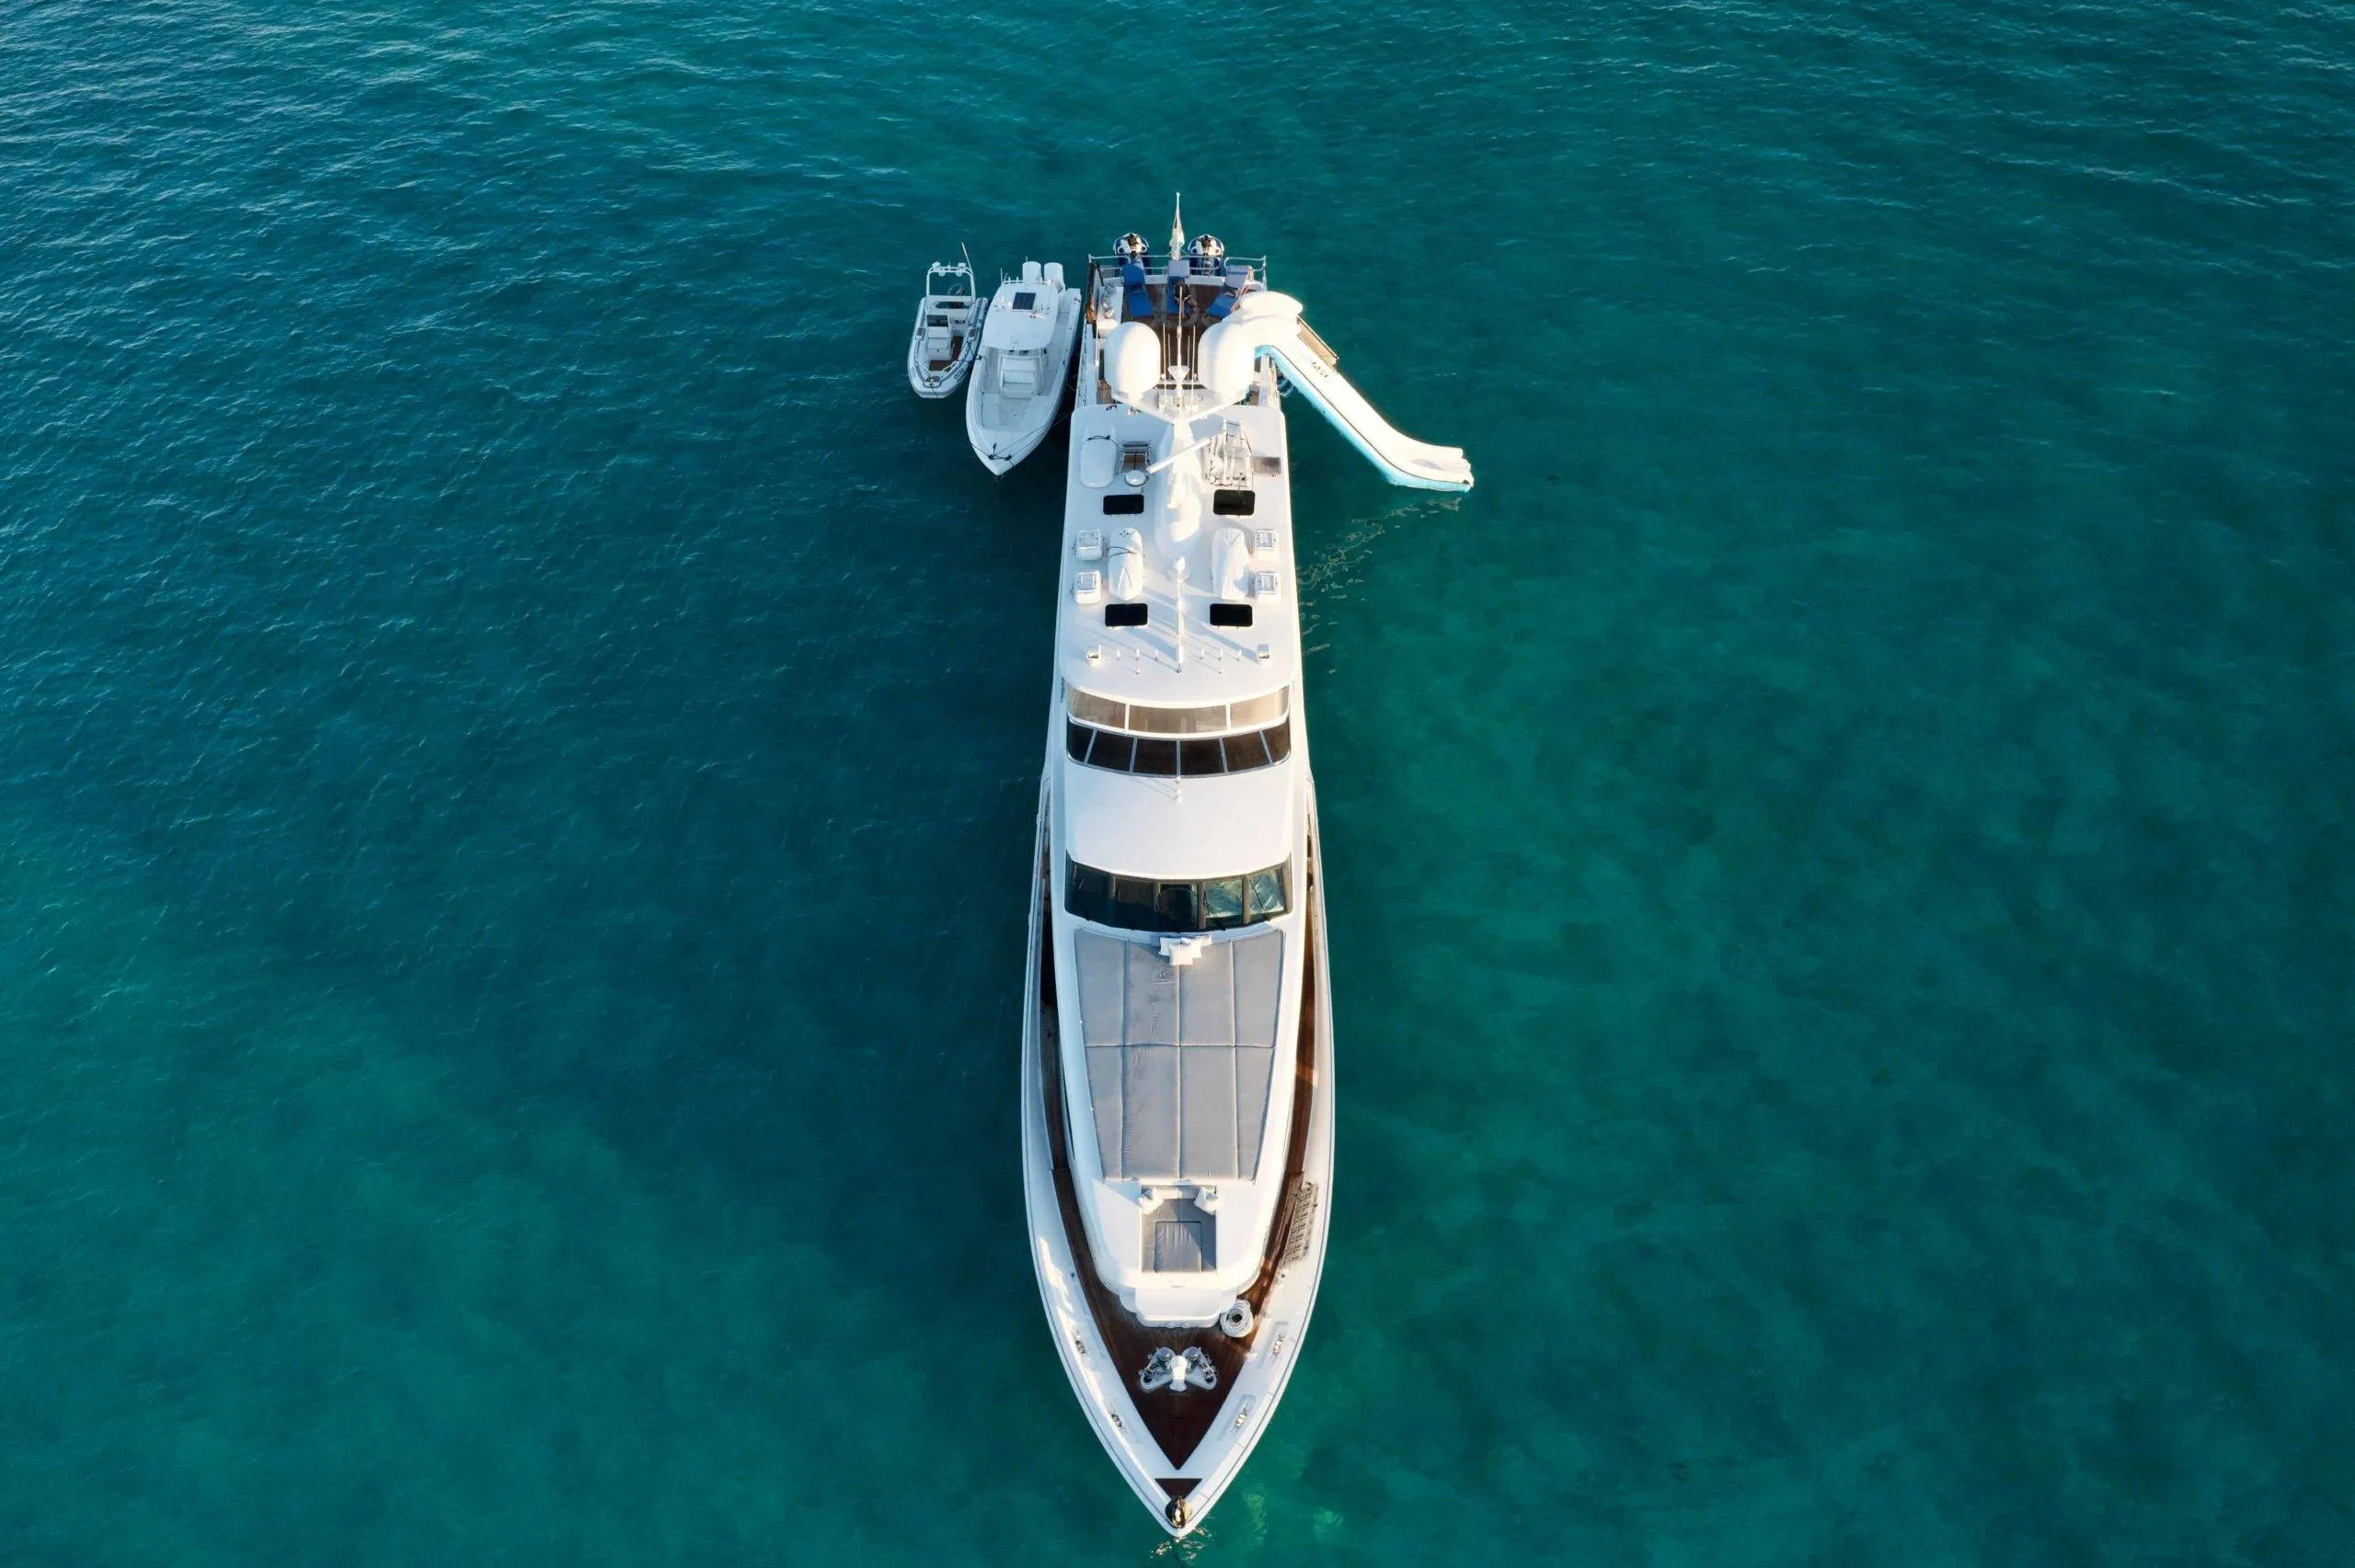 Drone view of the Yacht Slide on superyacht Kashmir